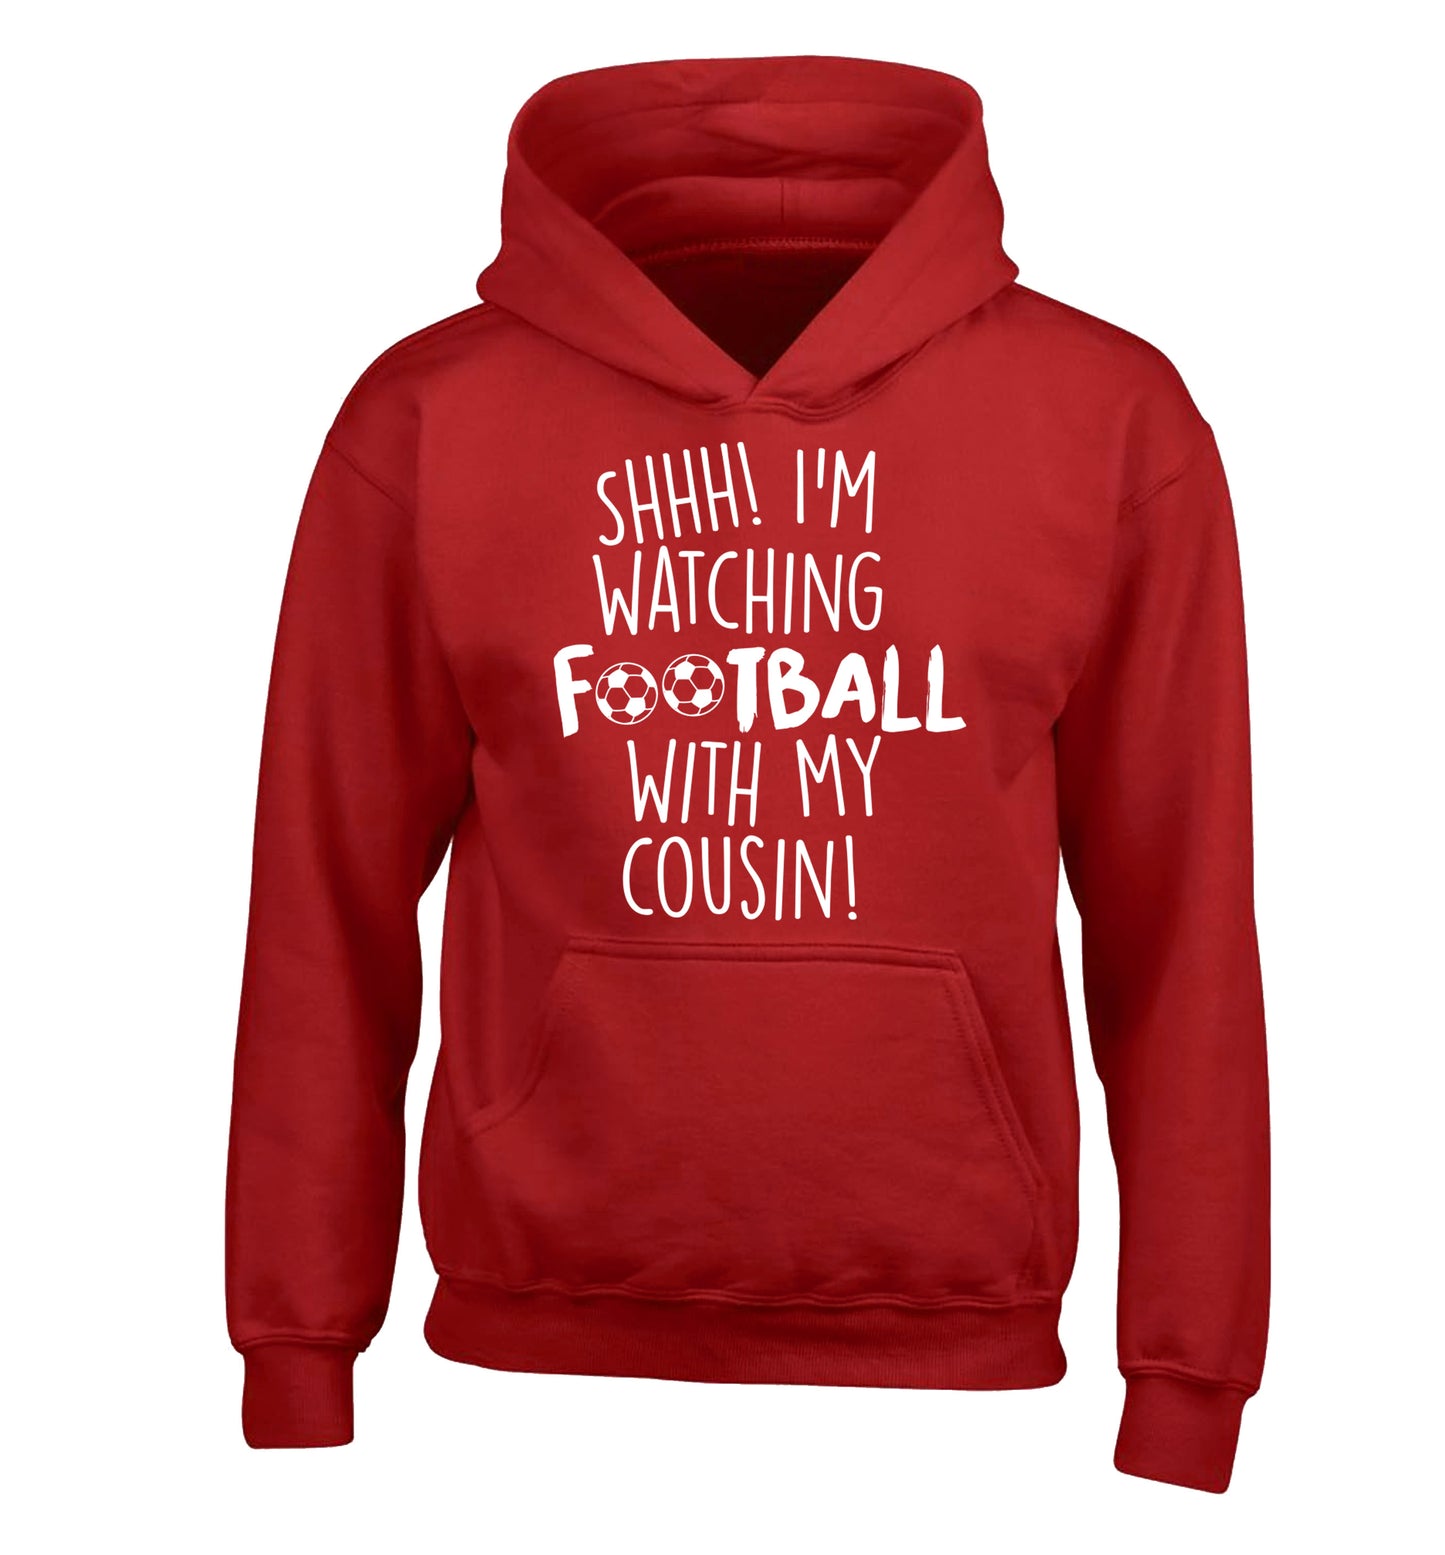 Shhh I'm watching football with my cousin children's red hoodie 12-14 Years